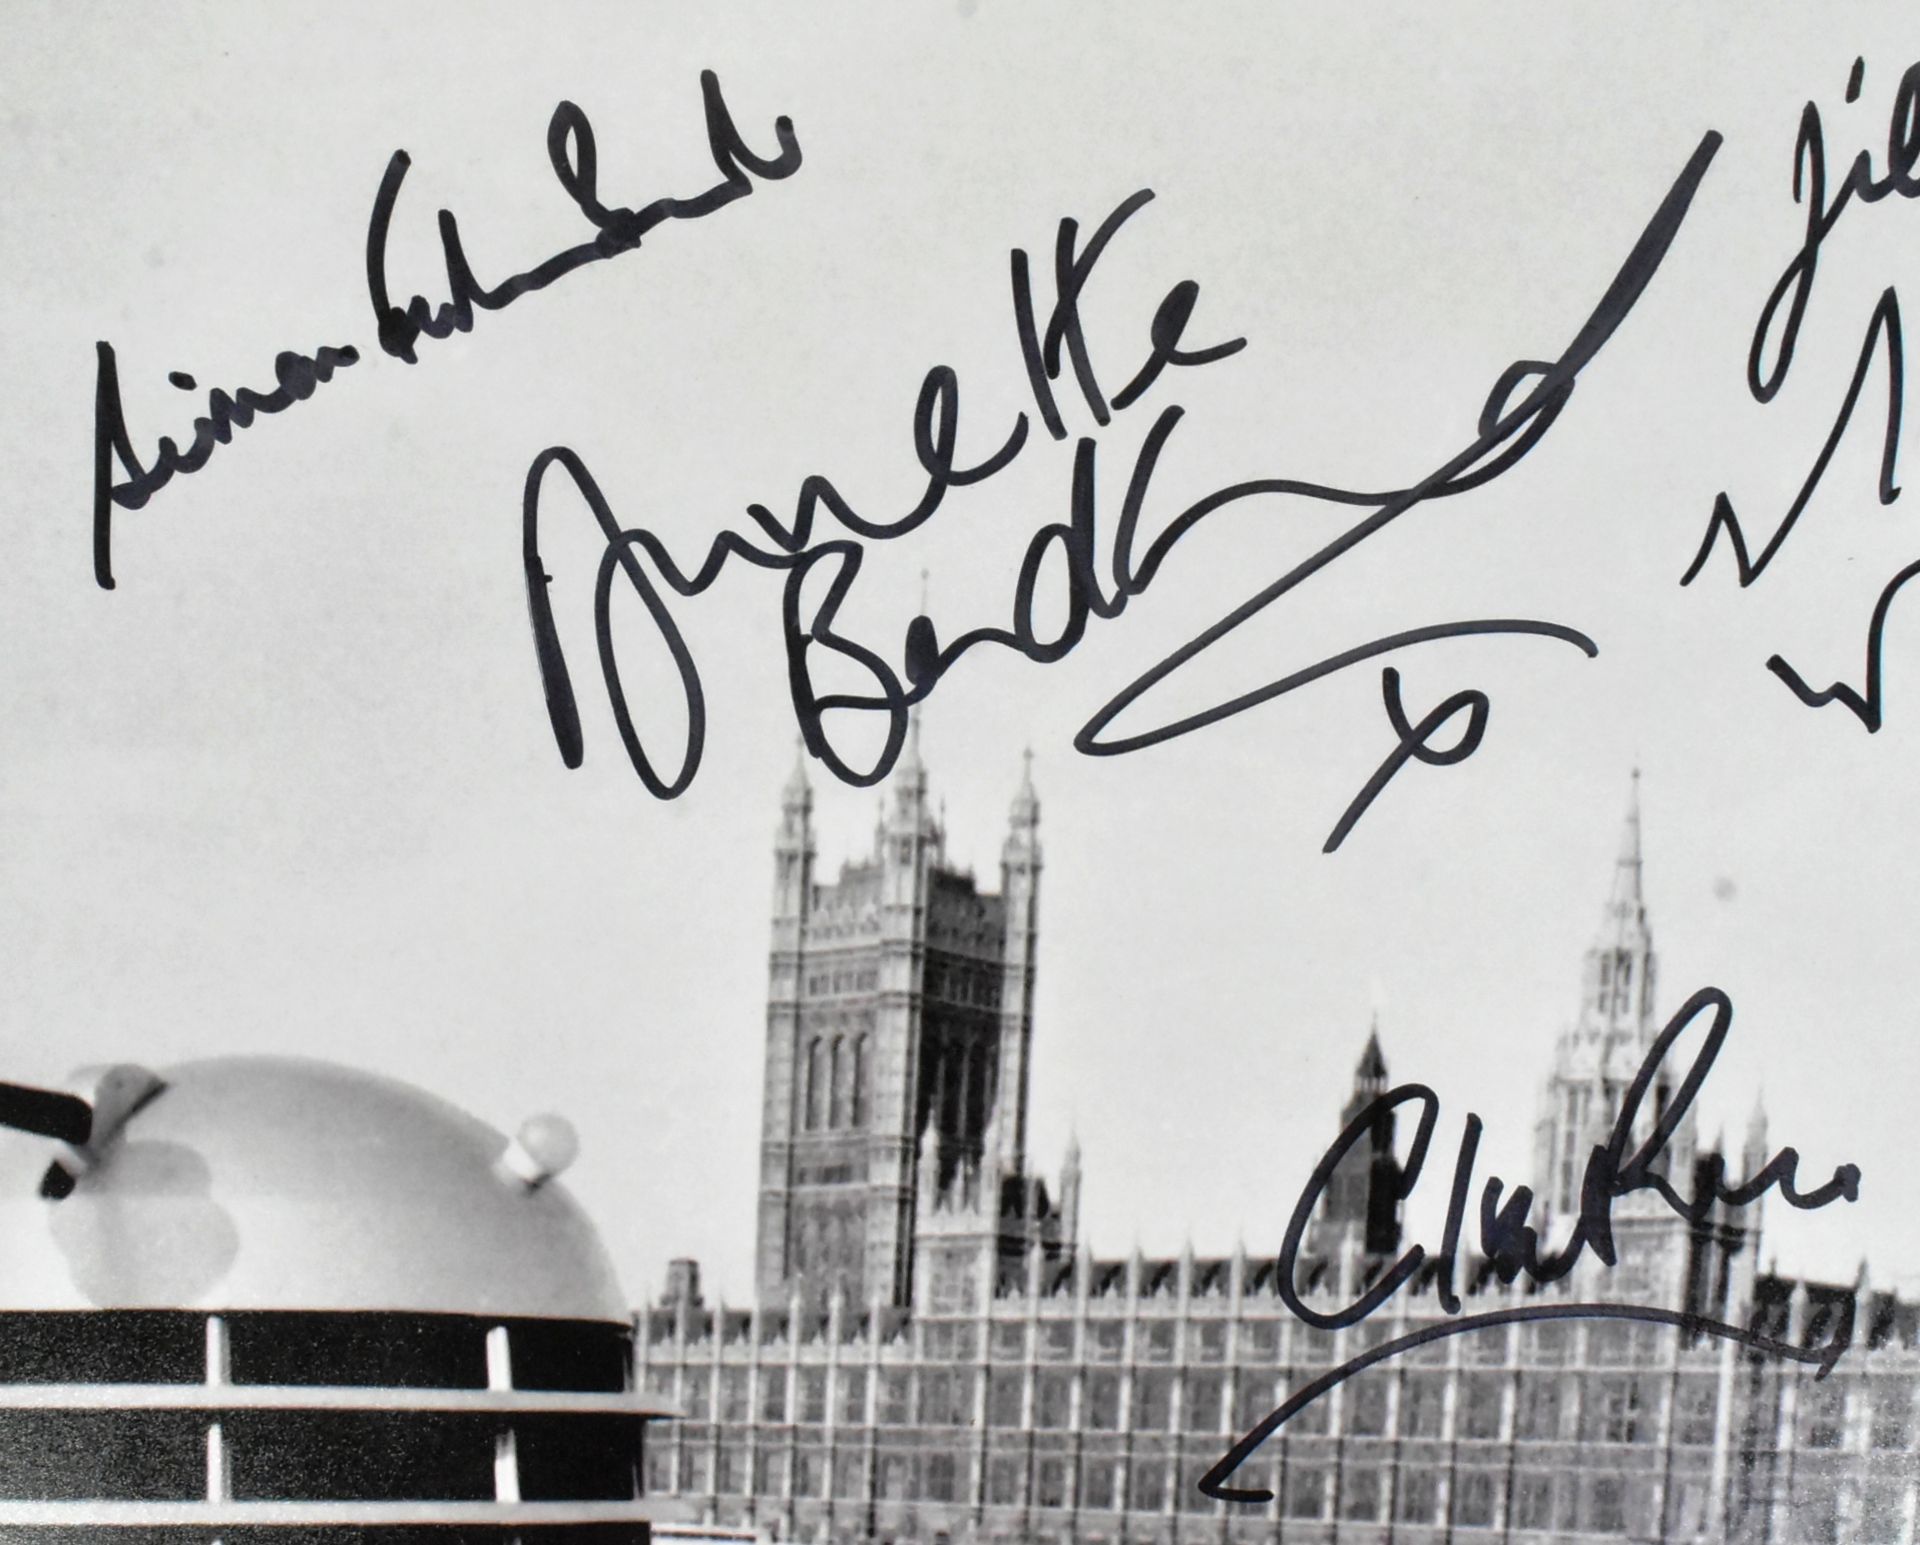 DOCTOR WHO - LARGE MULTI-SIGNED 12X14" BLACK & WHITE PHOTOGRAPH - Image 3 of 4